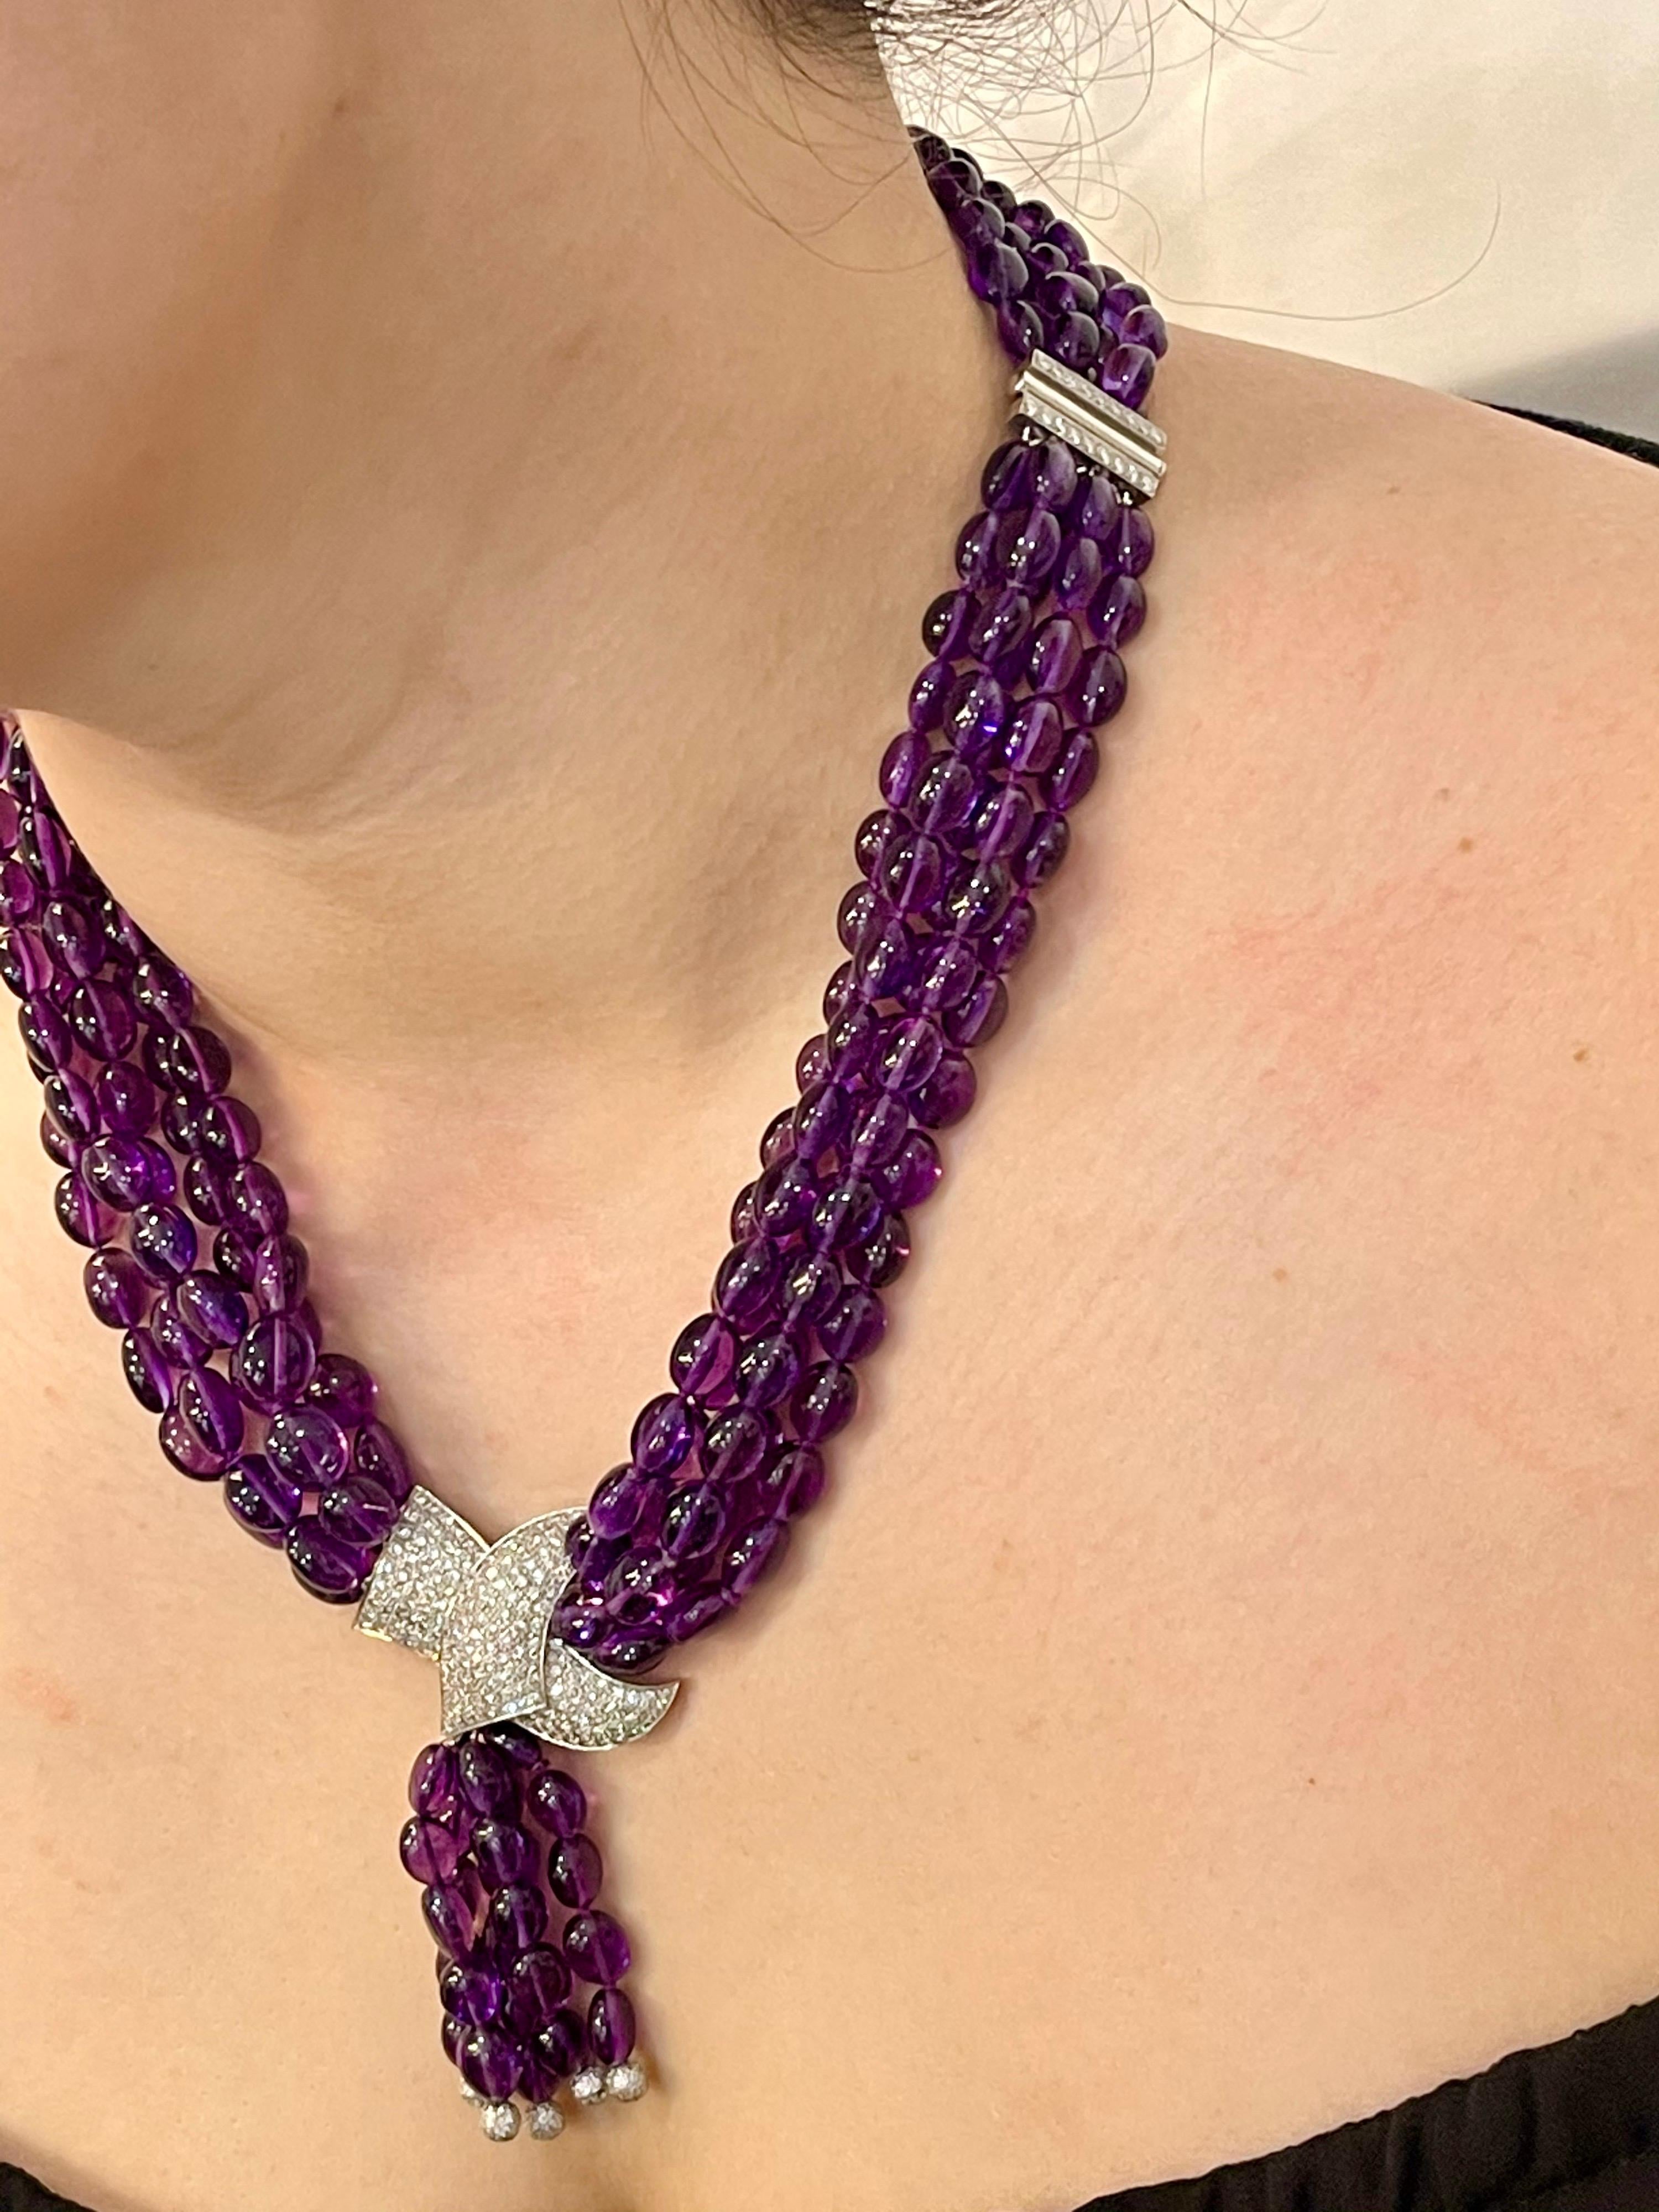 700 Ct Natural Amethyst Multi Layer Bead Necklace in Platinum with 9 Ct Diamonds For Sale 1